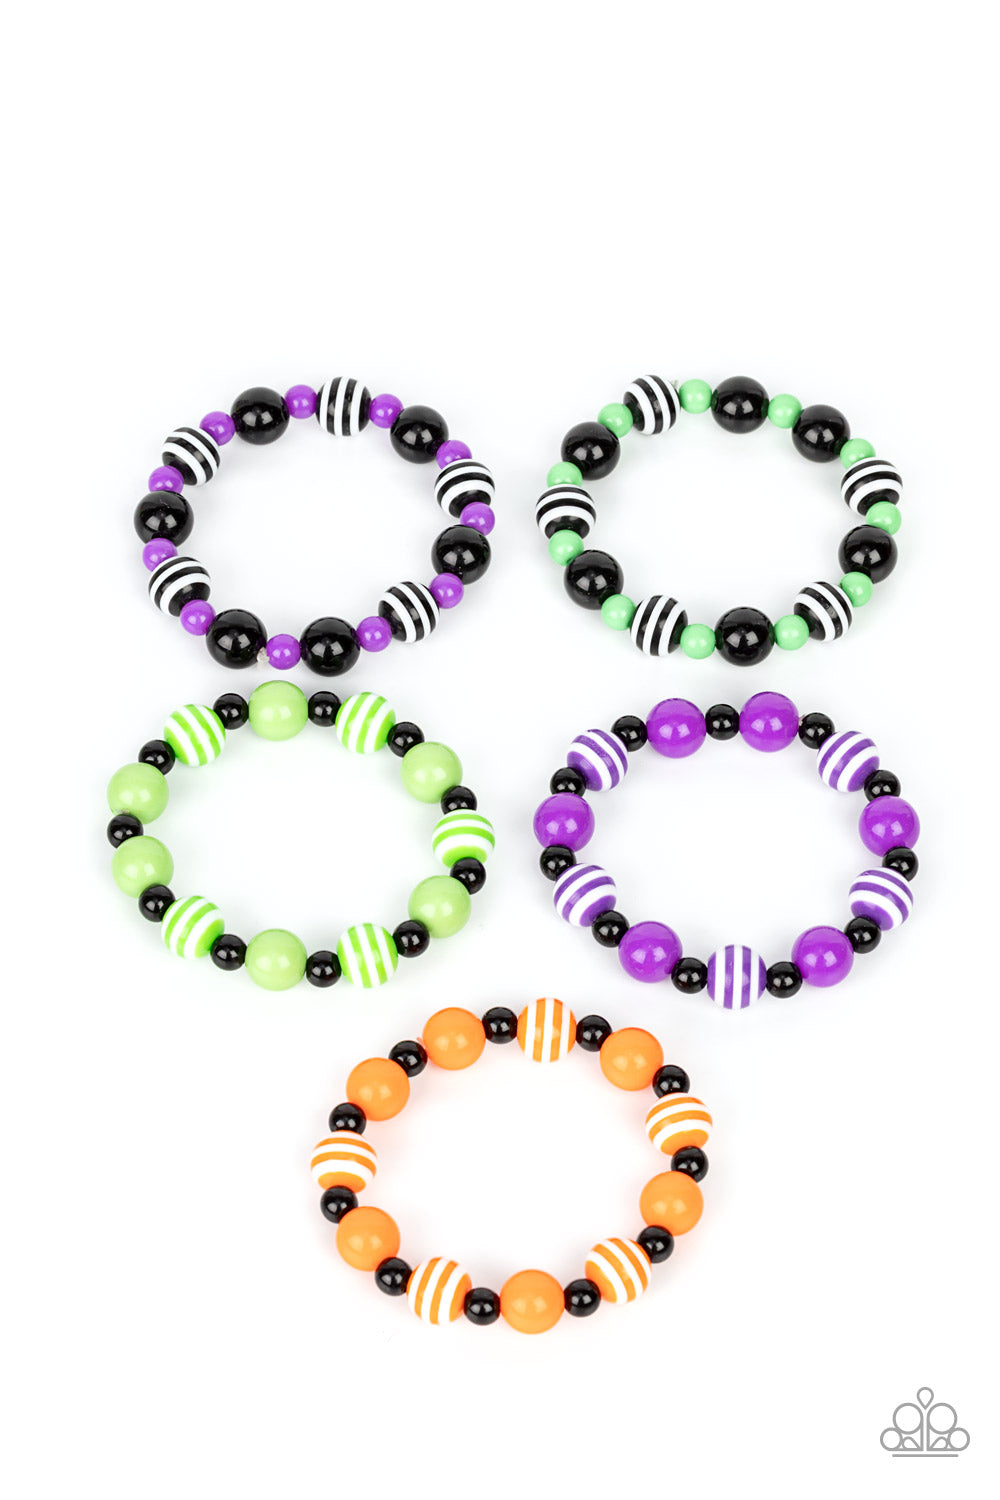 1 pack of 5 Lil Precious Halloween Themed Bracelets